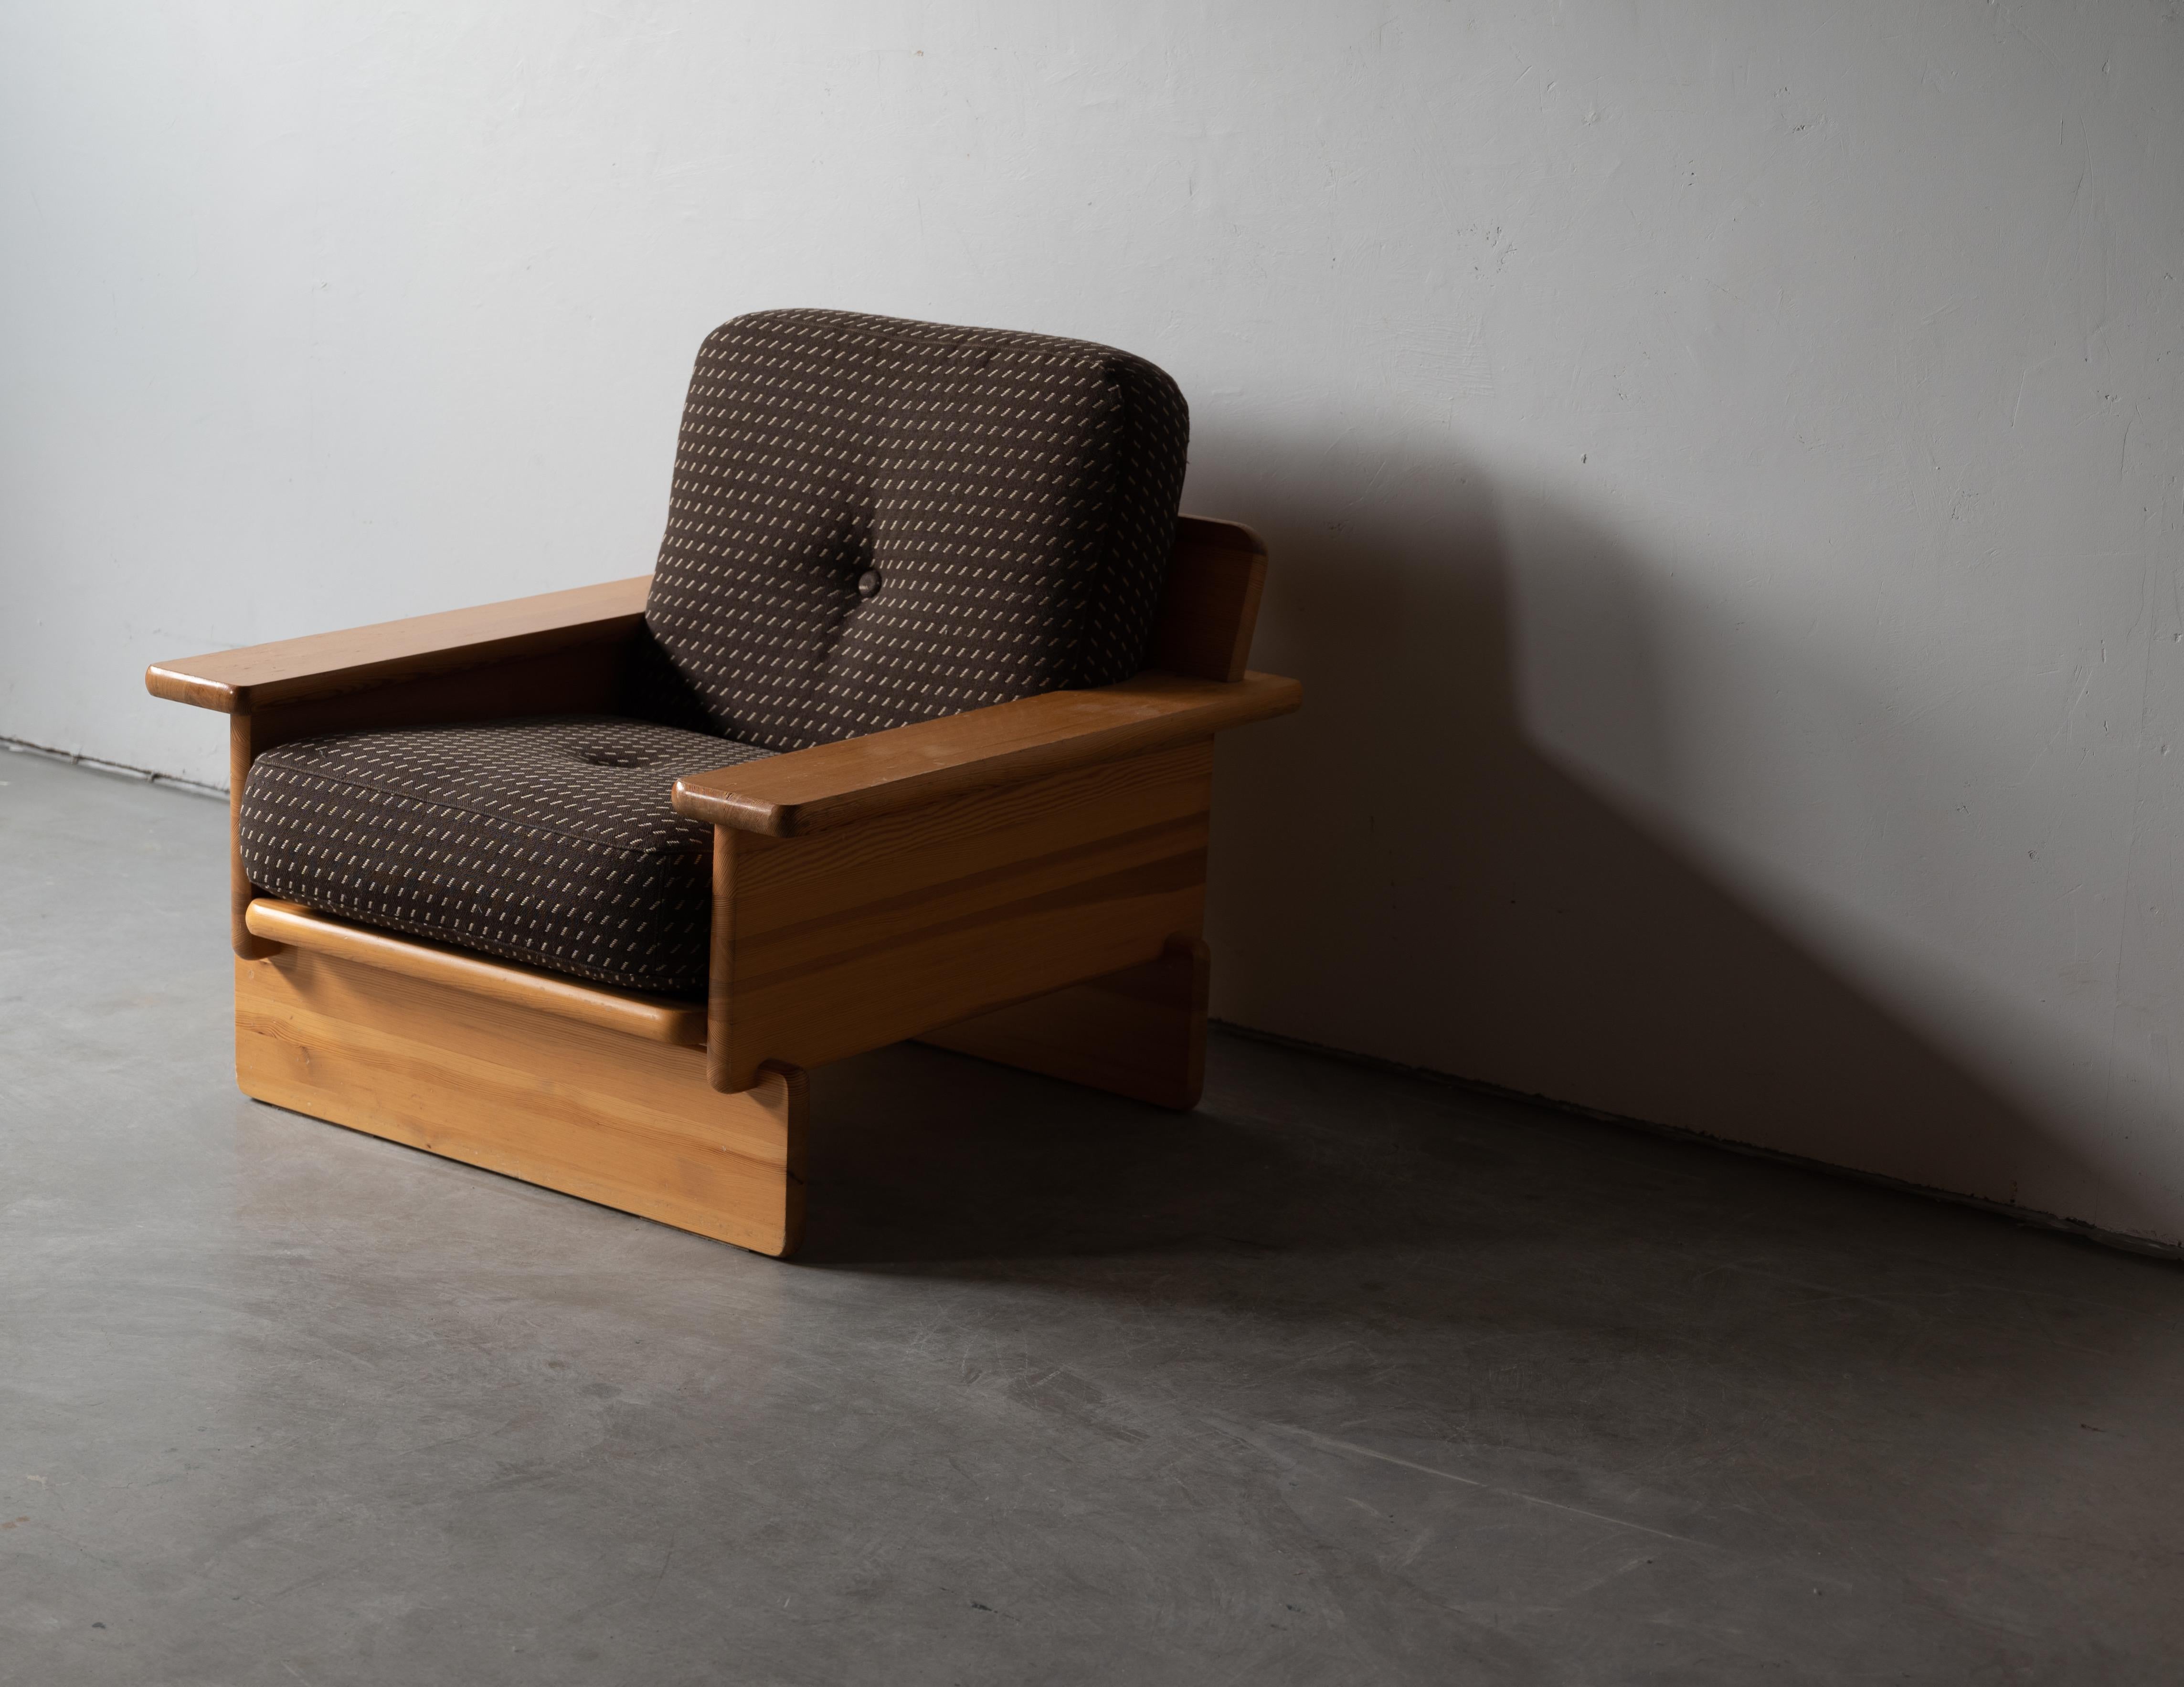 Swedish Cabinetmaker, Lounge Chairs, Solid Pine, Brown Fabric, Finland, c. 1970s For Sale 2